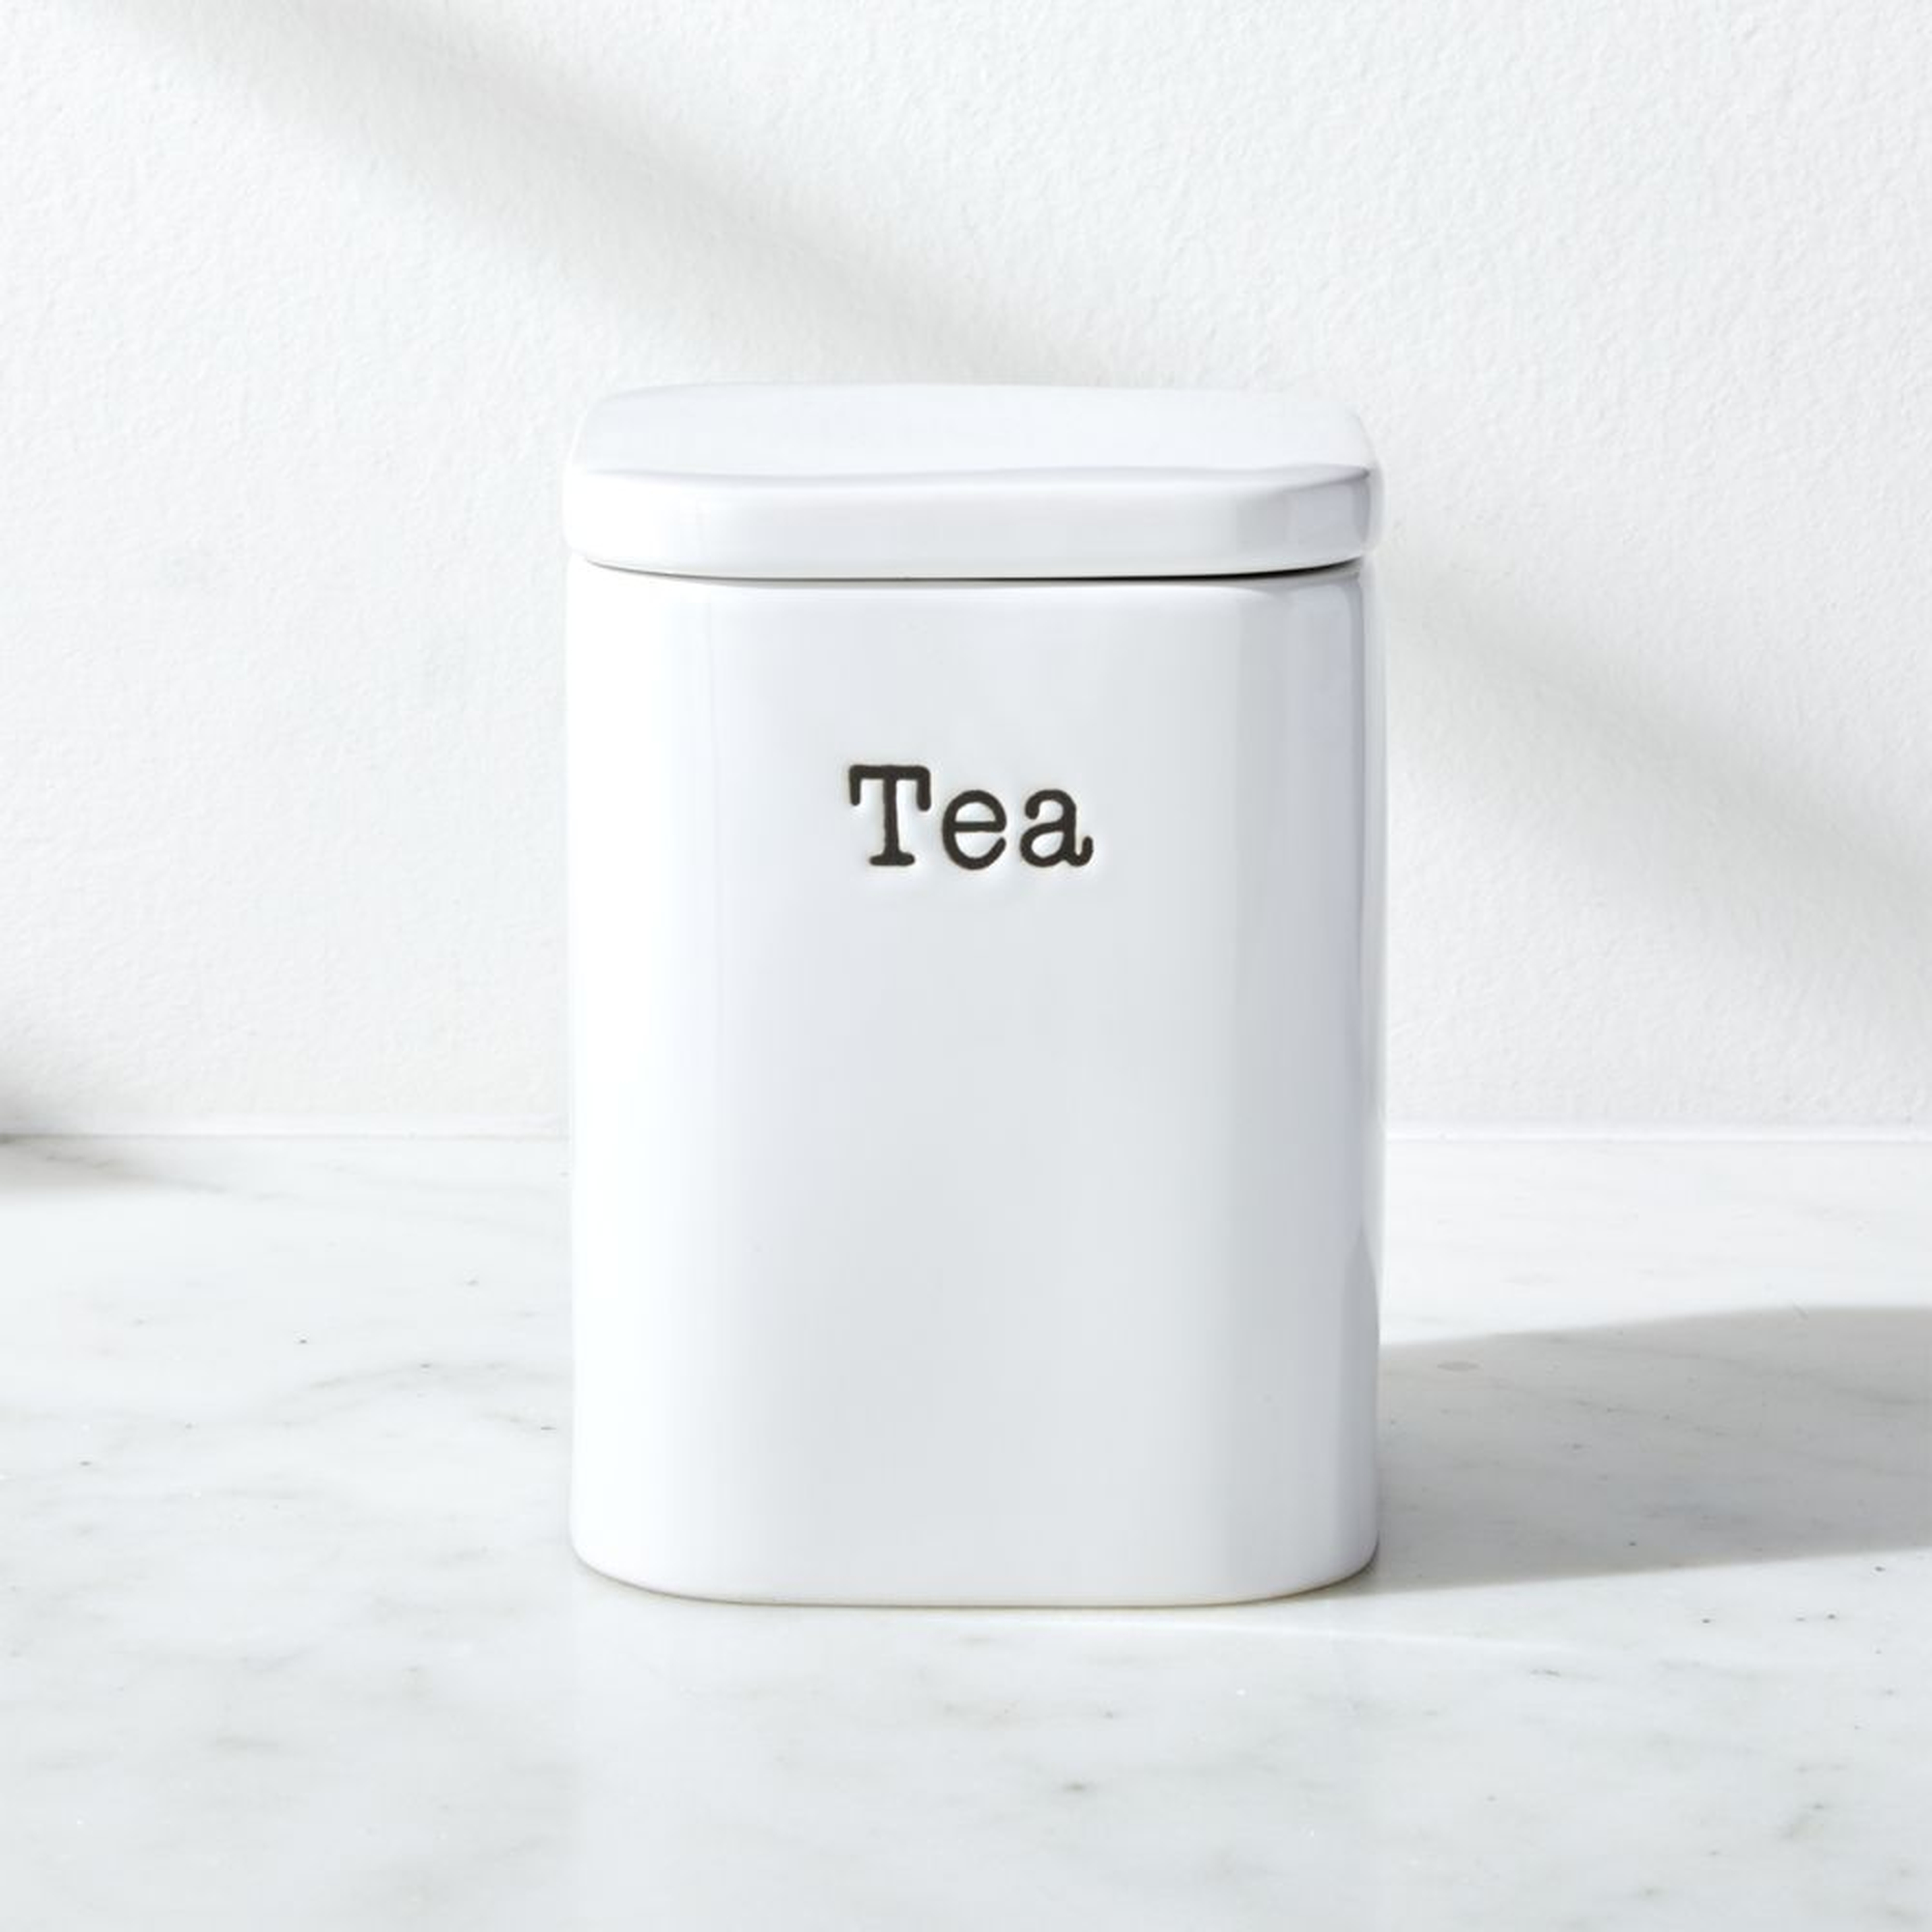 Tea Storage Canister - Crate and Barrel